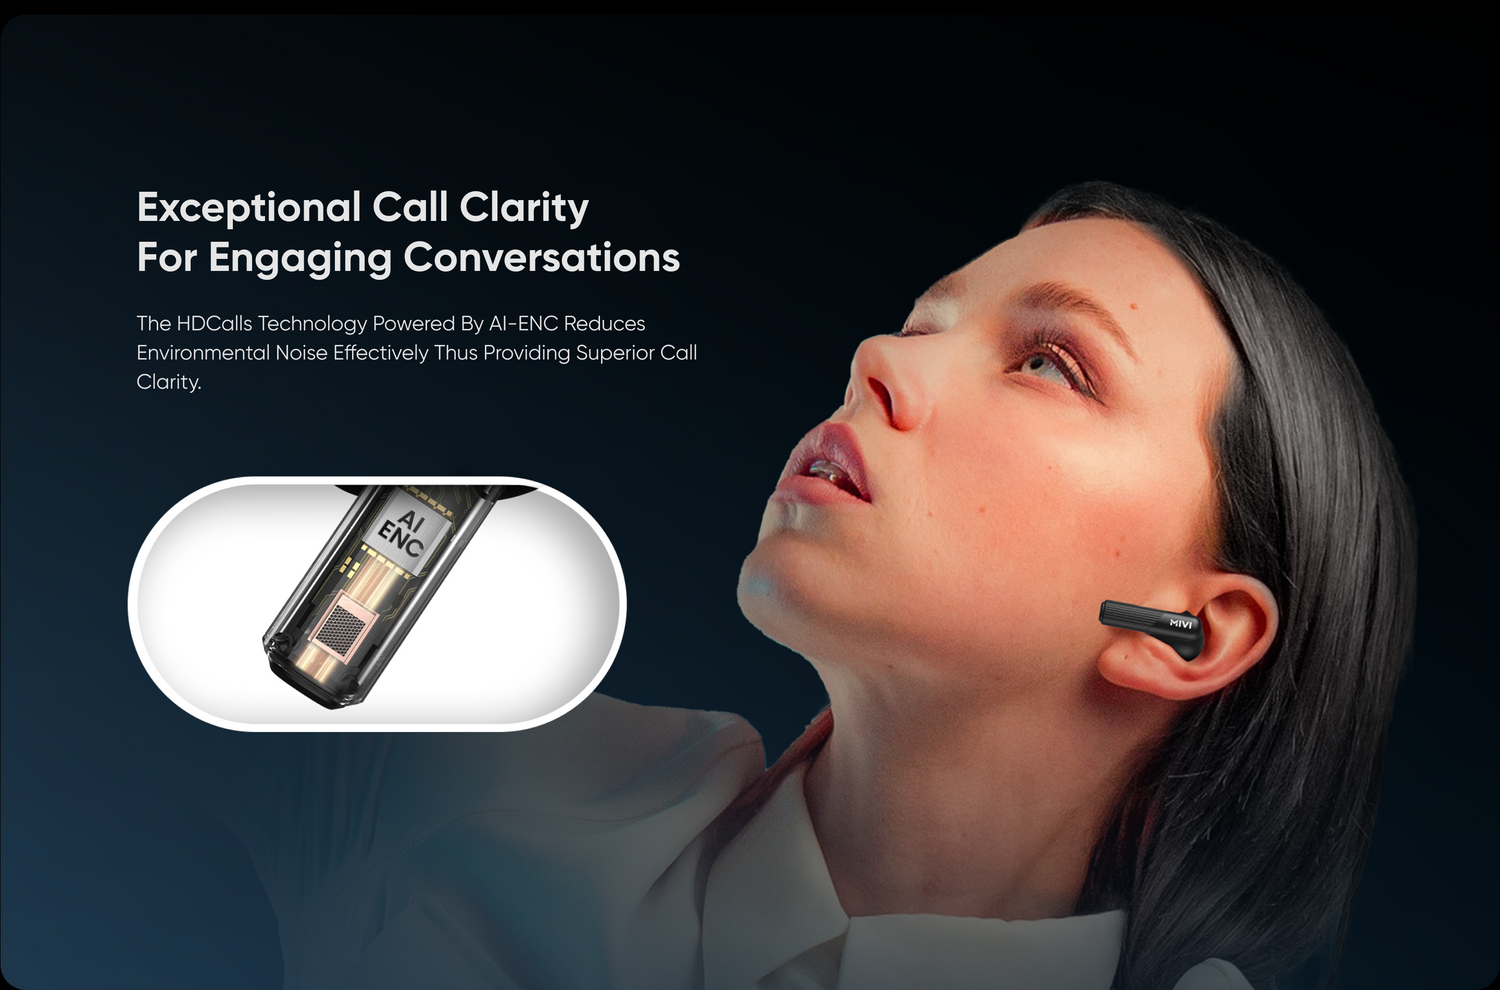 Exceptional Call Clarity for Engaging Conversations The HDCalls Technology powered by AI-ENC reduces environmental noise effectively thus providing superior call clarity.